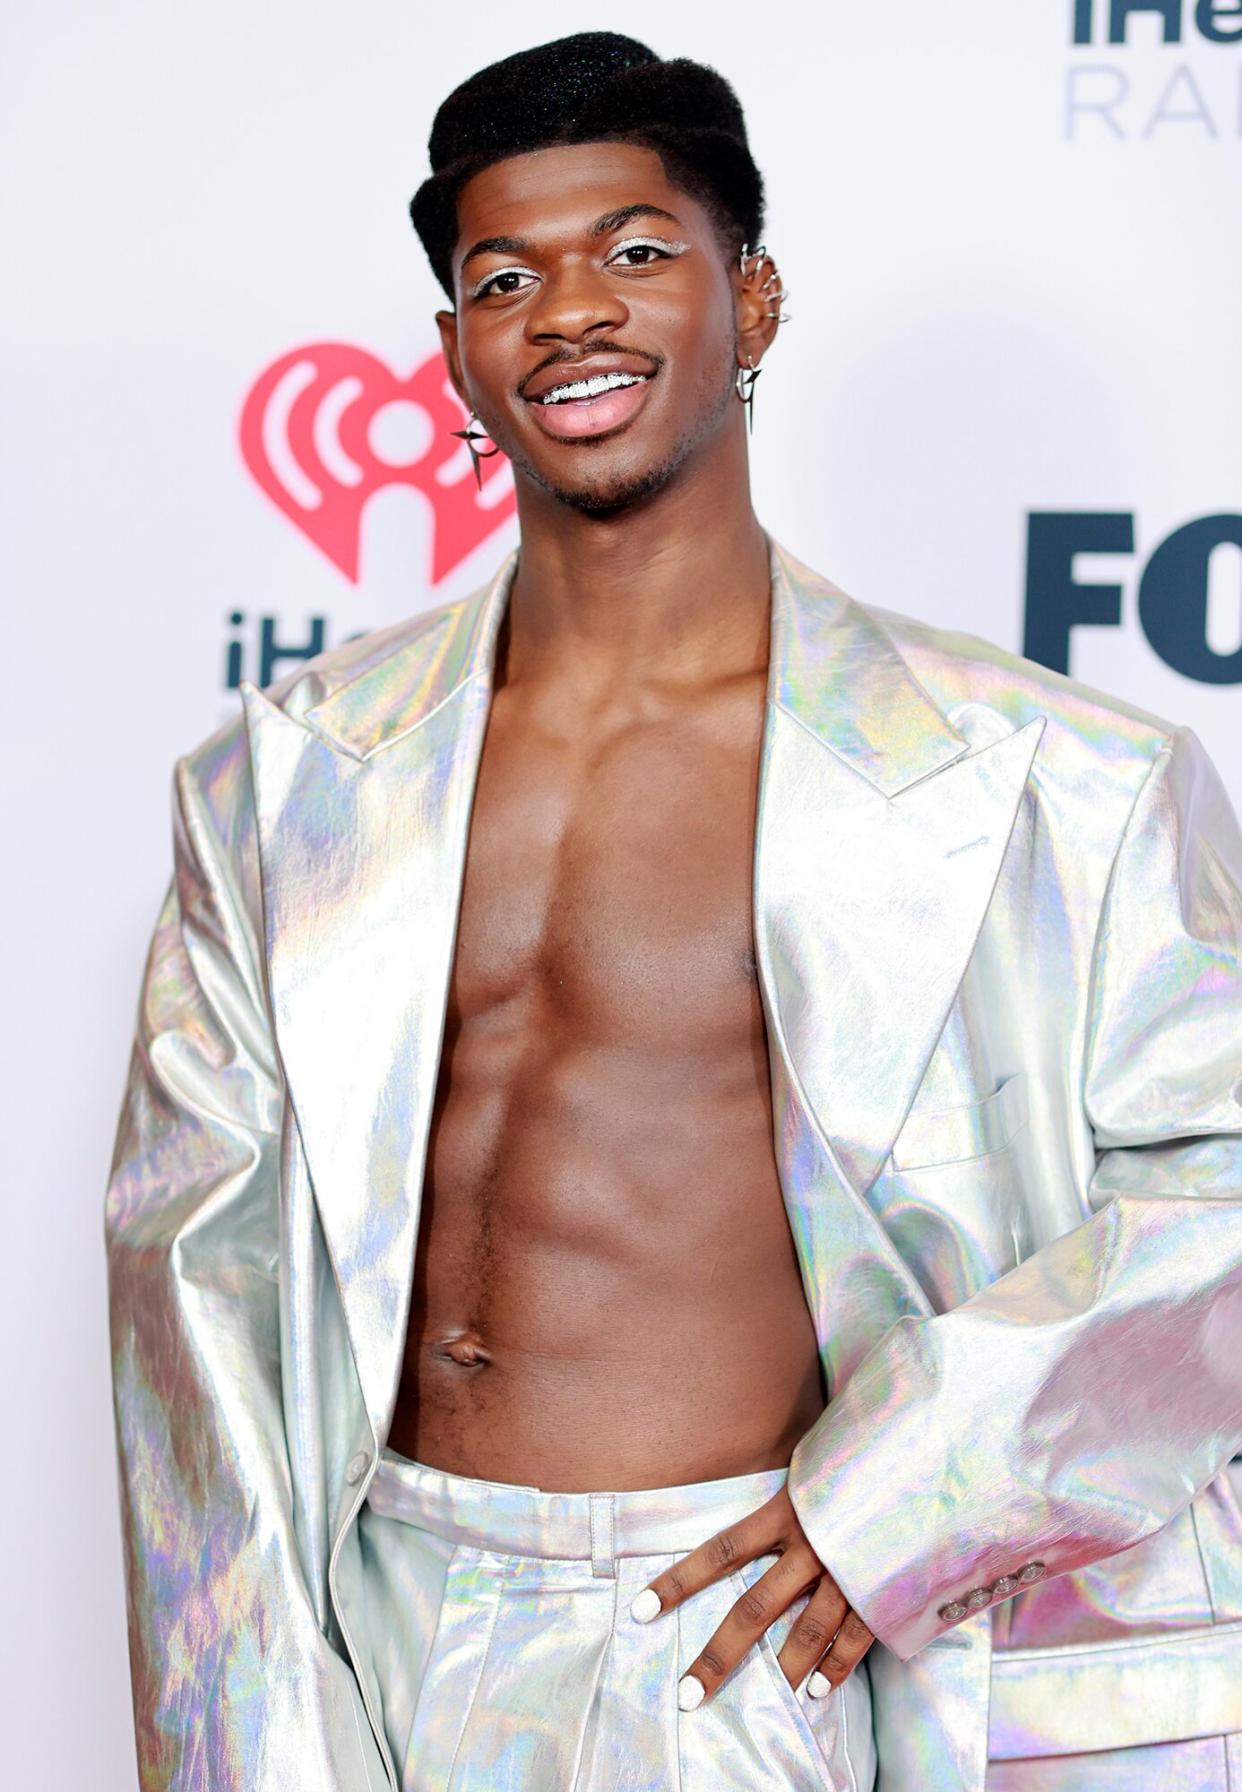 Lil Nas X attends the 2021 iHeartRadio Music Awards at The Dolby Theatre in Los Angeles, California, which was broadcast live on FOX on May 27, 2021